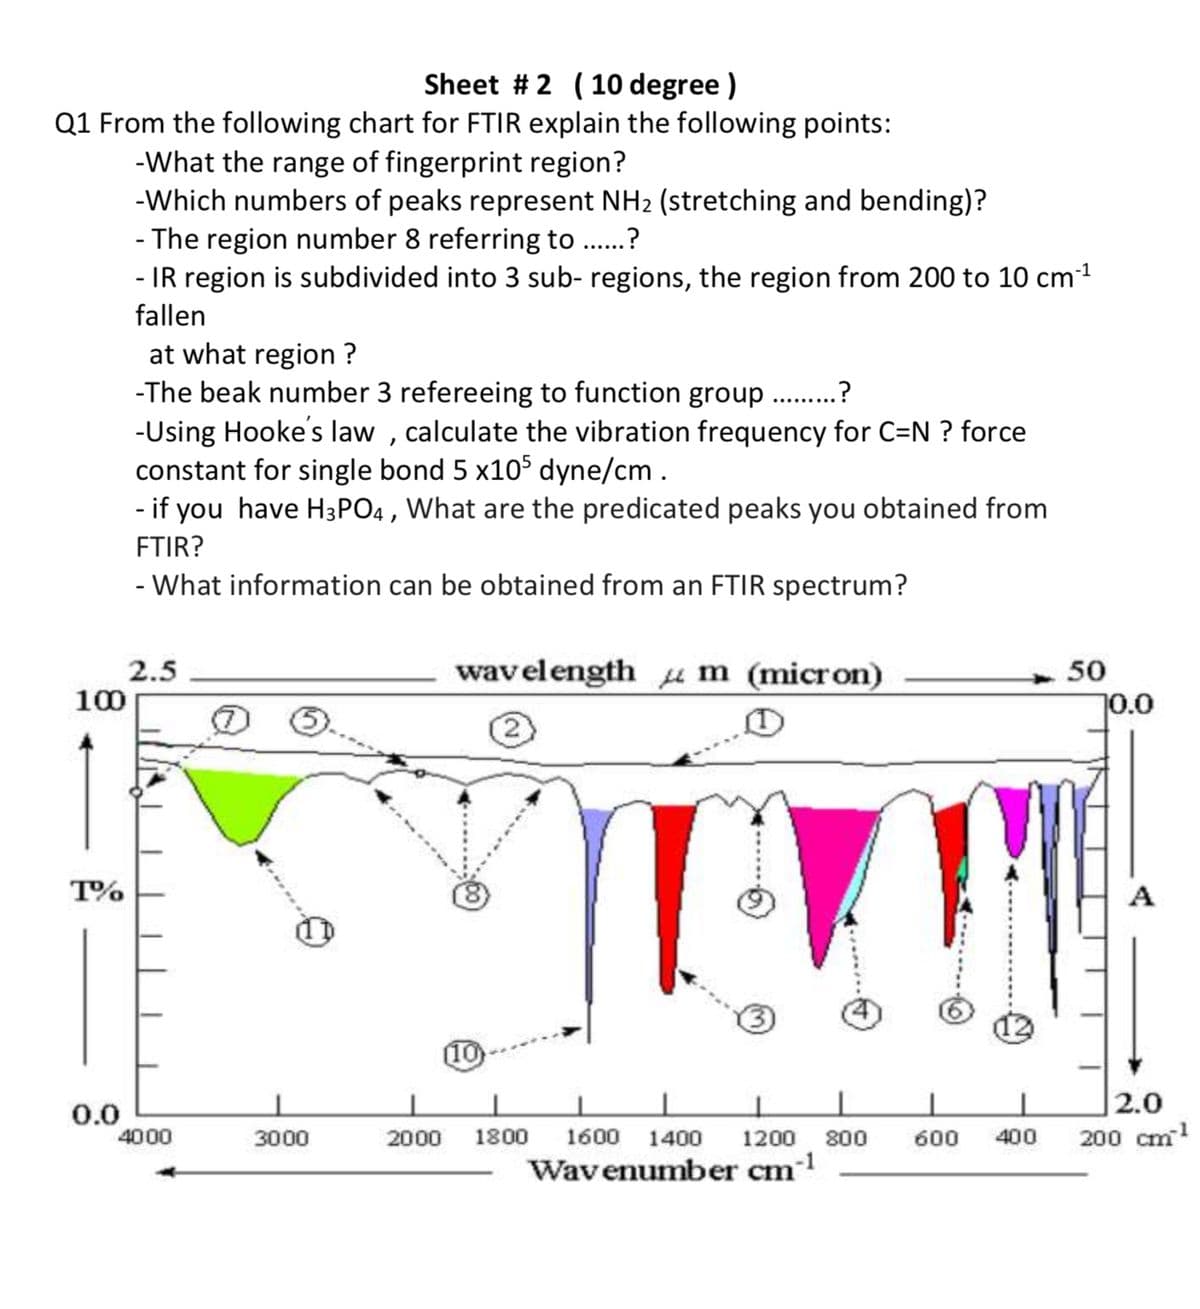 Sheet #2 (10 degree)
Q1 From the following chart for FTIR explain the following points:
-What the range of fingerprint region?
-Which numbers of peaks represent NH2 (stretching and bending)?
- The region number 8 referring to ......?
-1
- IR region is subdivided into 3 sub- regions, the region from 200 to 10 cm³¹
fallen
at what region?
-The beak number 3 refereeing to function group .........?
-Using Hooke's law, calculate the vibration frequency for C=N ? force
constant for single bond 5 x105 dyne/cm.
- if you have H3PO4, What are the predicated peaks you obtained from
FTIR?
- What information can be obtained from an FTIR spectrum?
2.5
100
T%
wavelength μm (micron)
50
10.0
10
A
0.0
4000
3000
2000
1800 1600 1400 1200
800
600 400
2.0
200 cm²¹
Wavenumber cm*¹